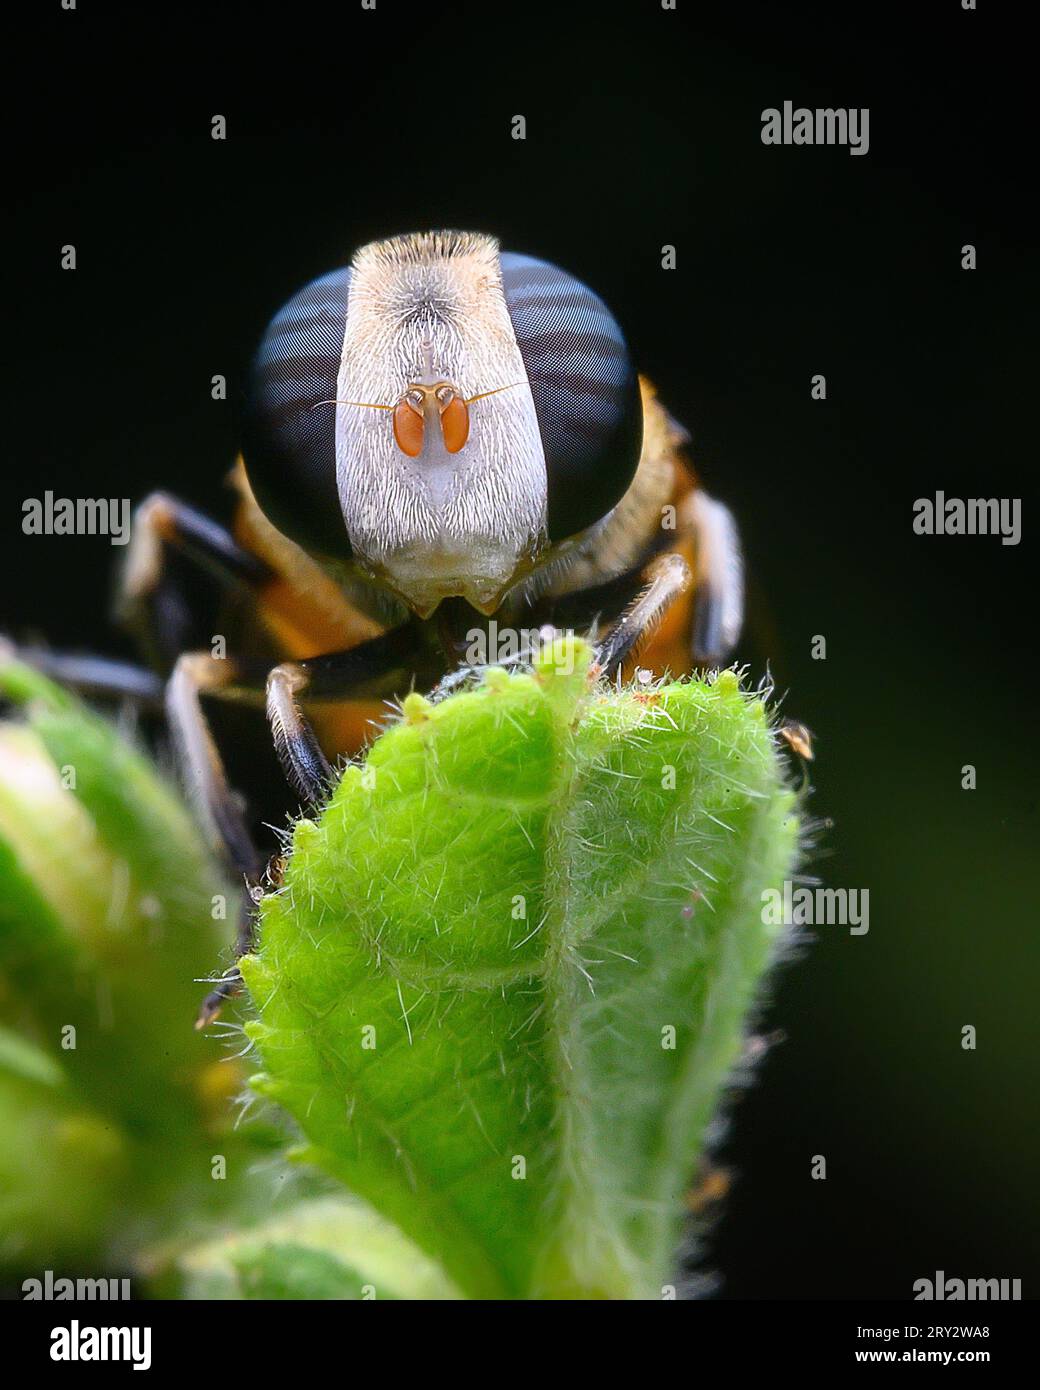 Extreme close up image of fly with large compound eyes Stock Photo